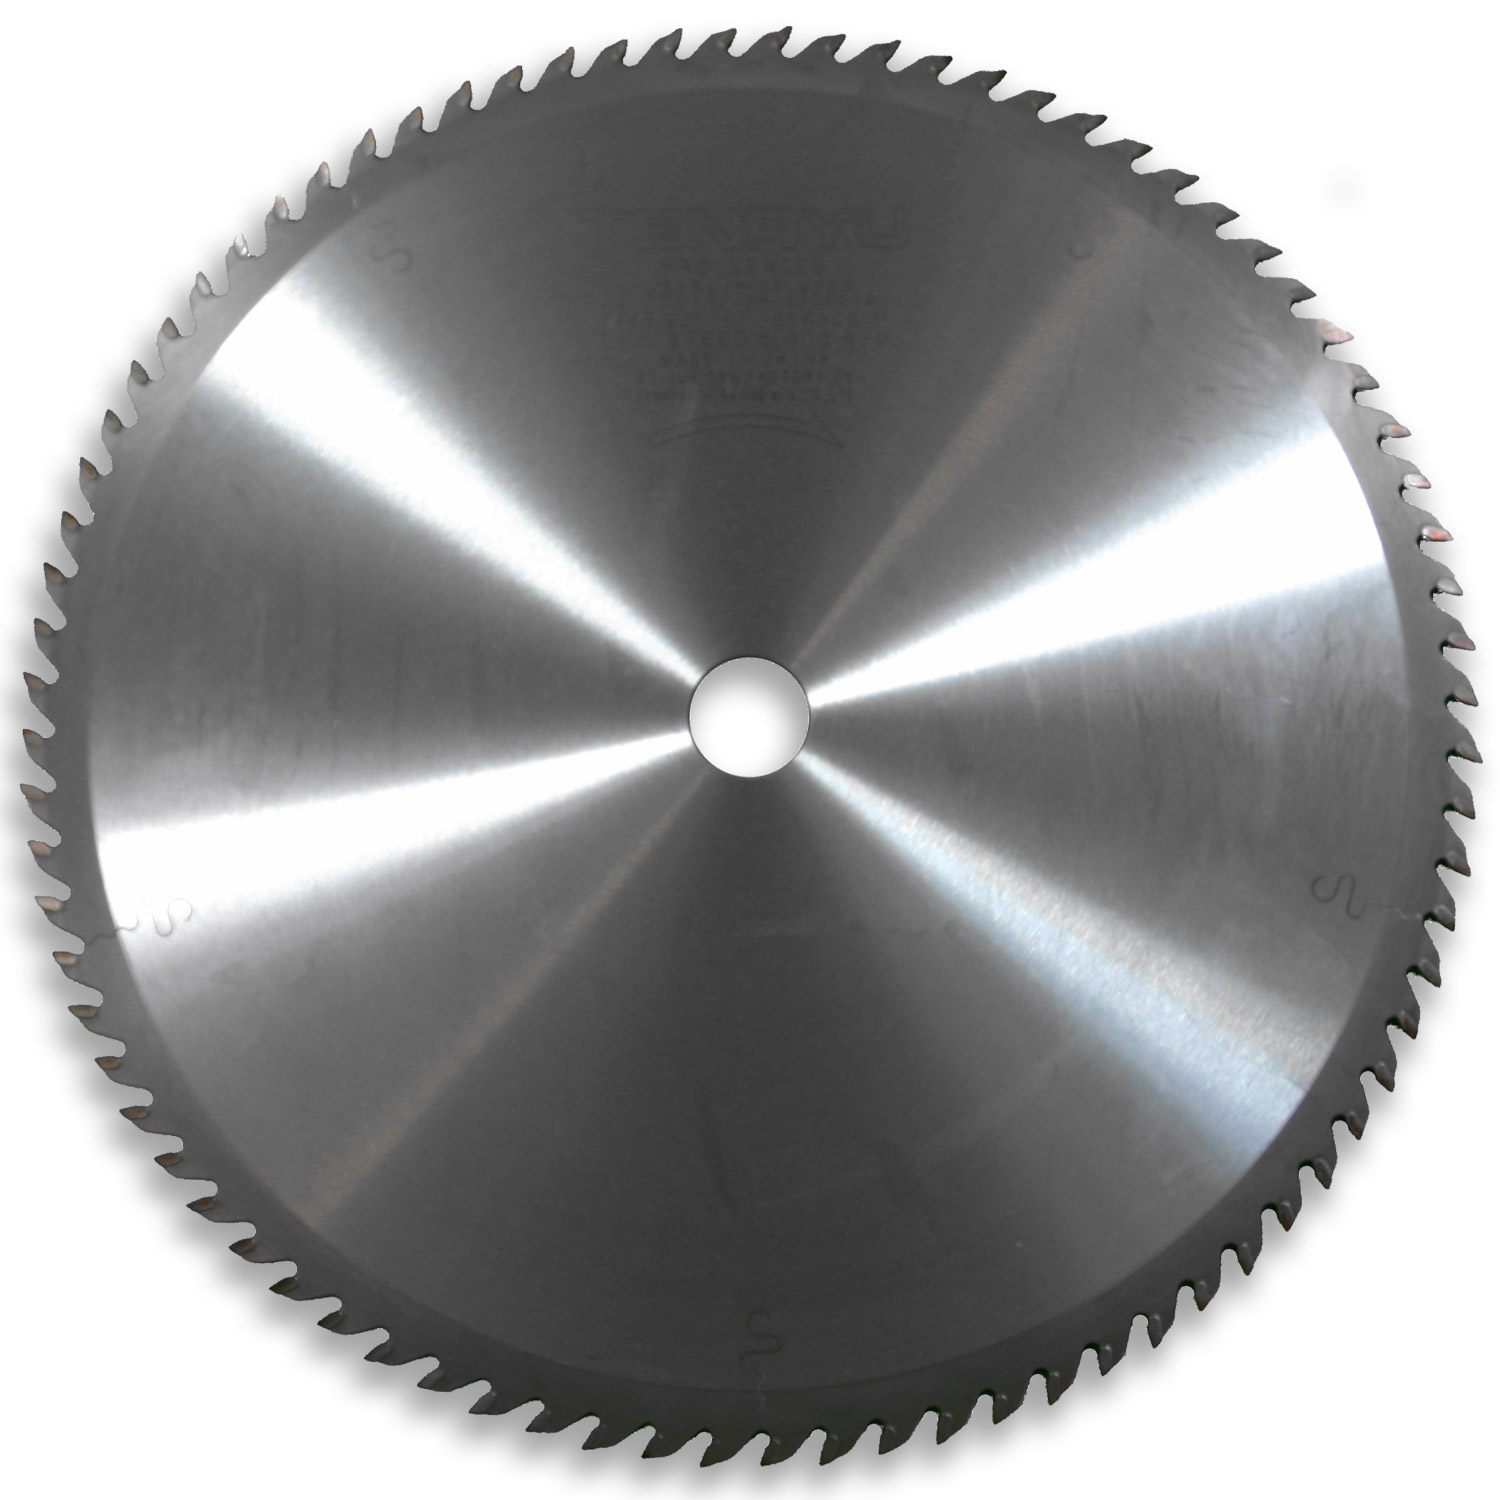 /UserFiles/images/categories/saw/_bl/ade/Saw_Blades.Circular_Saw_Blades.jpg